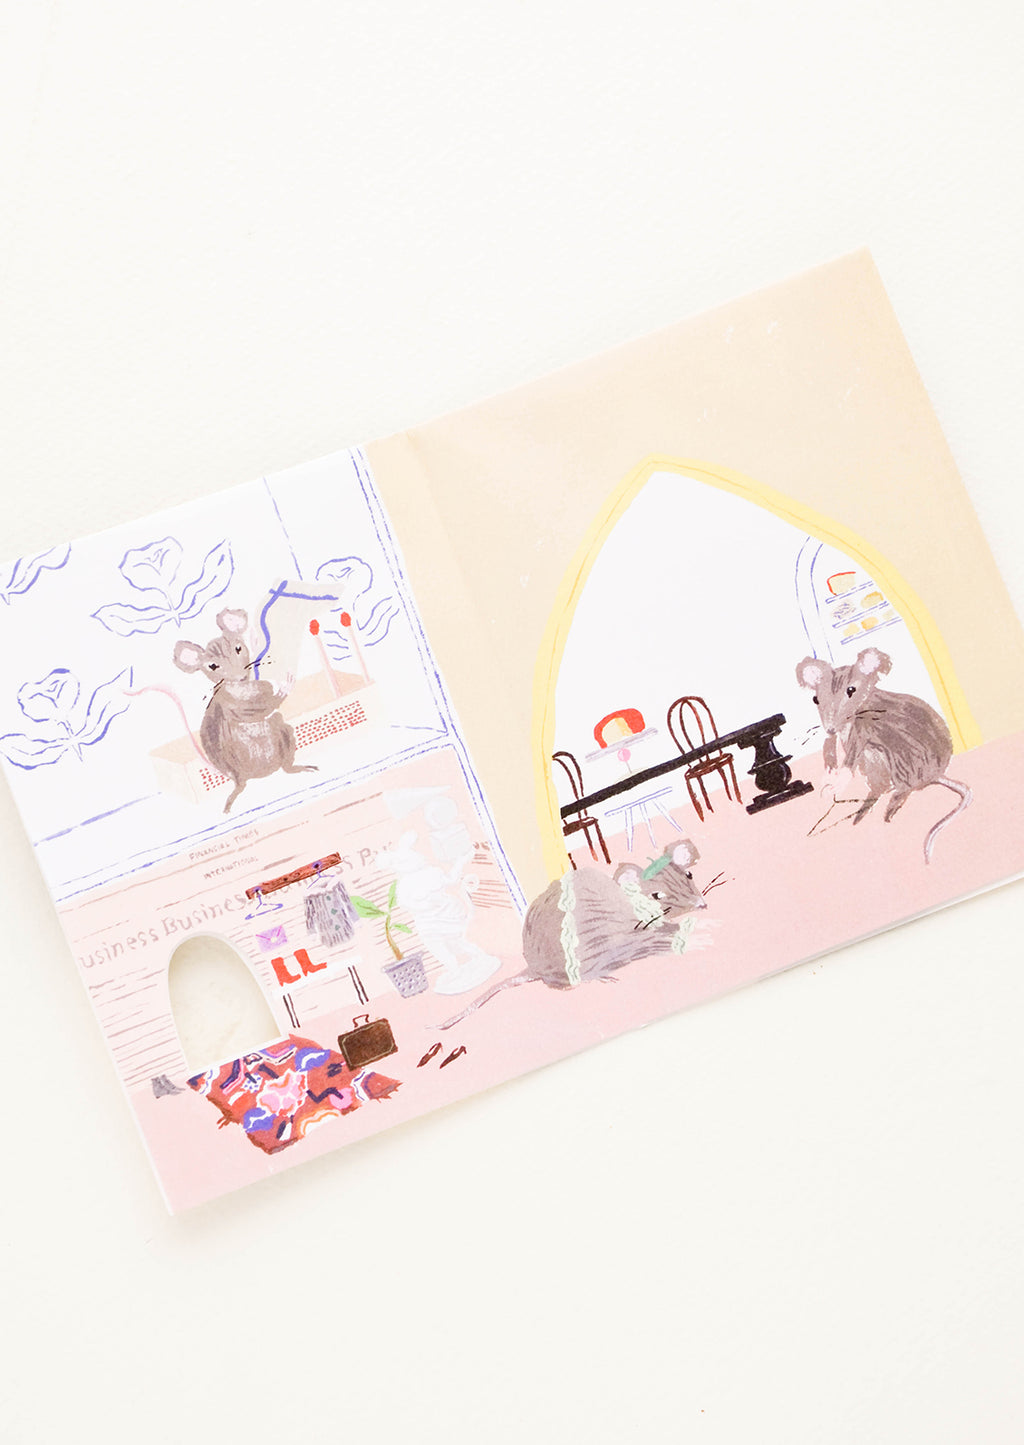 2: Inside of a greeting card with a full size illustration of mice having a party